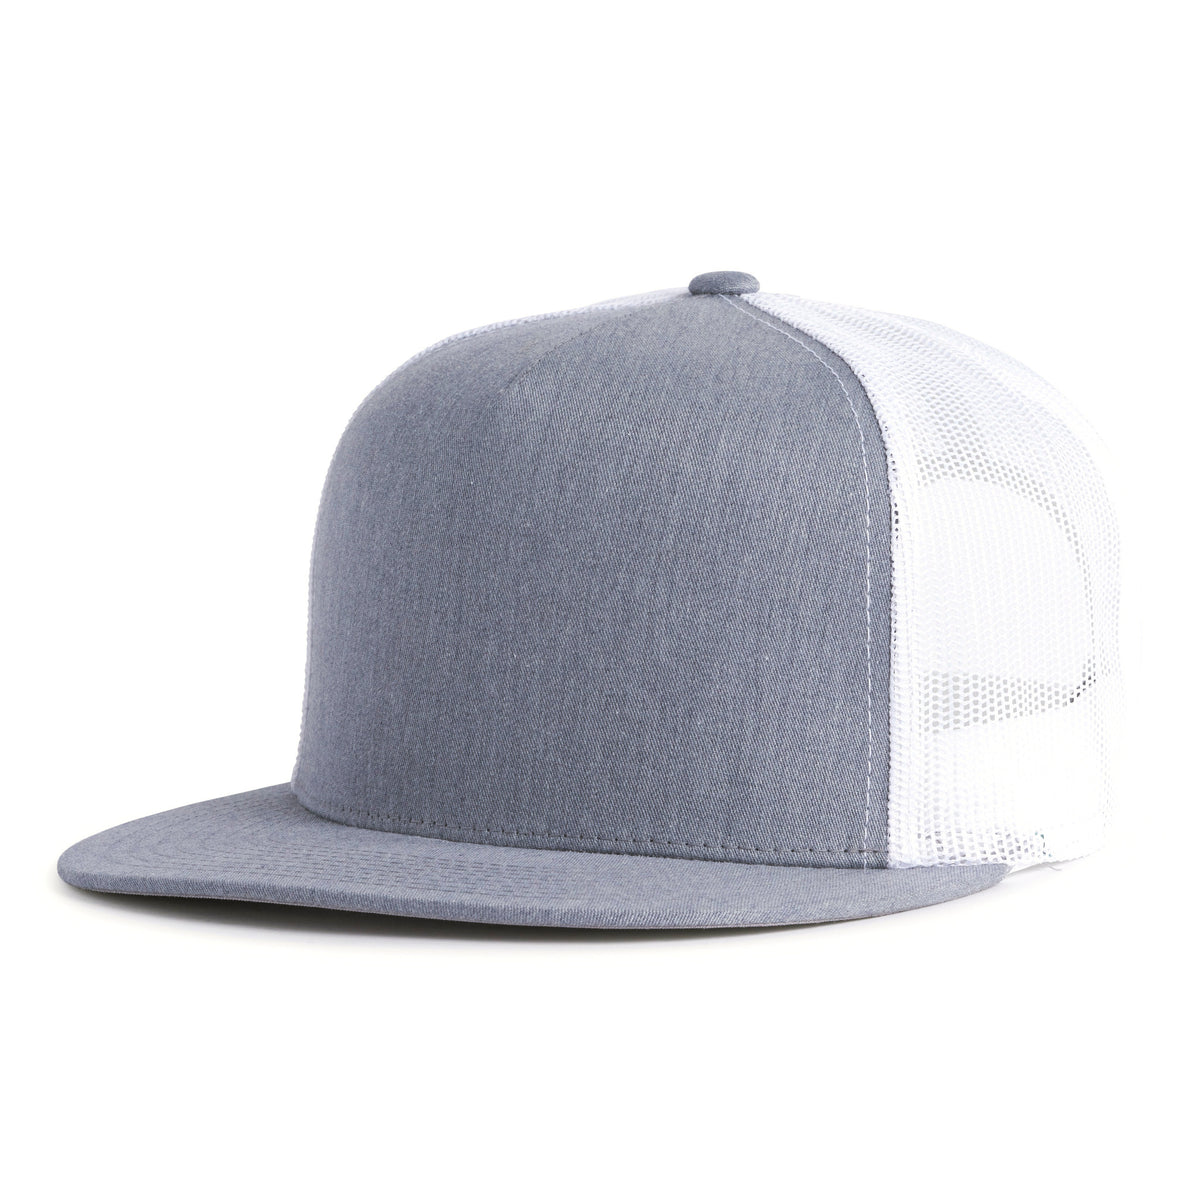 Heather grey trucker hat with a flat bill, 5-panels, structured high crown, white mesh back, and a snapback closure from Tailgate Hats.